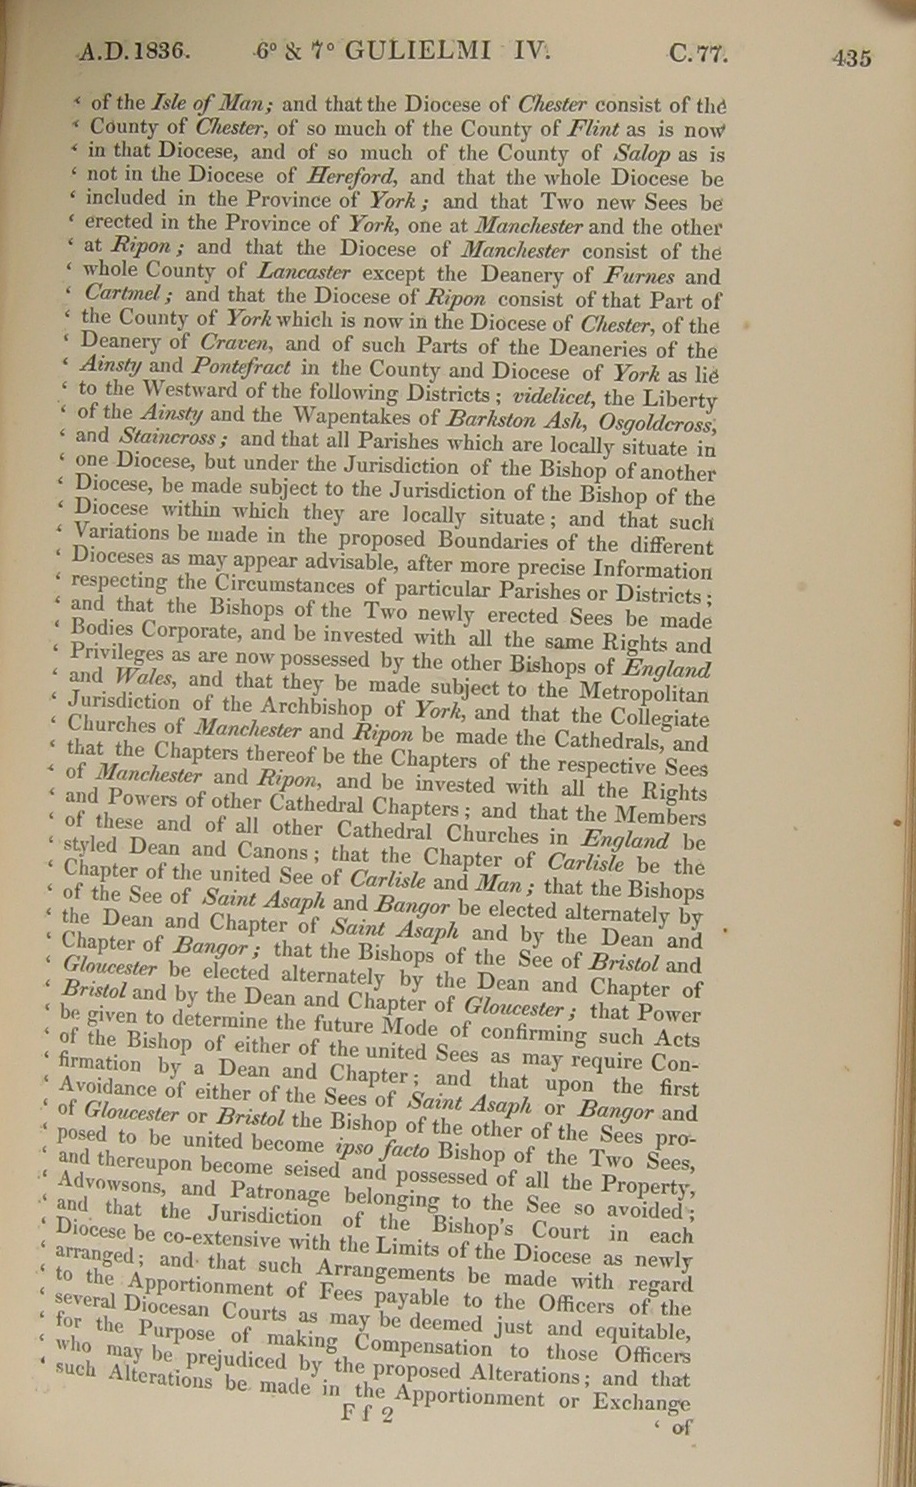 Image of 6 & 7 William IV, c. 77 (page 4 of 12). Click for larger image.